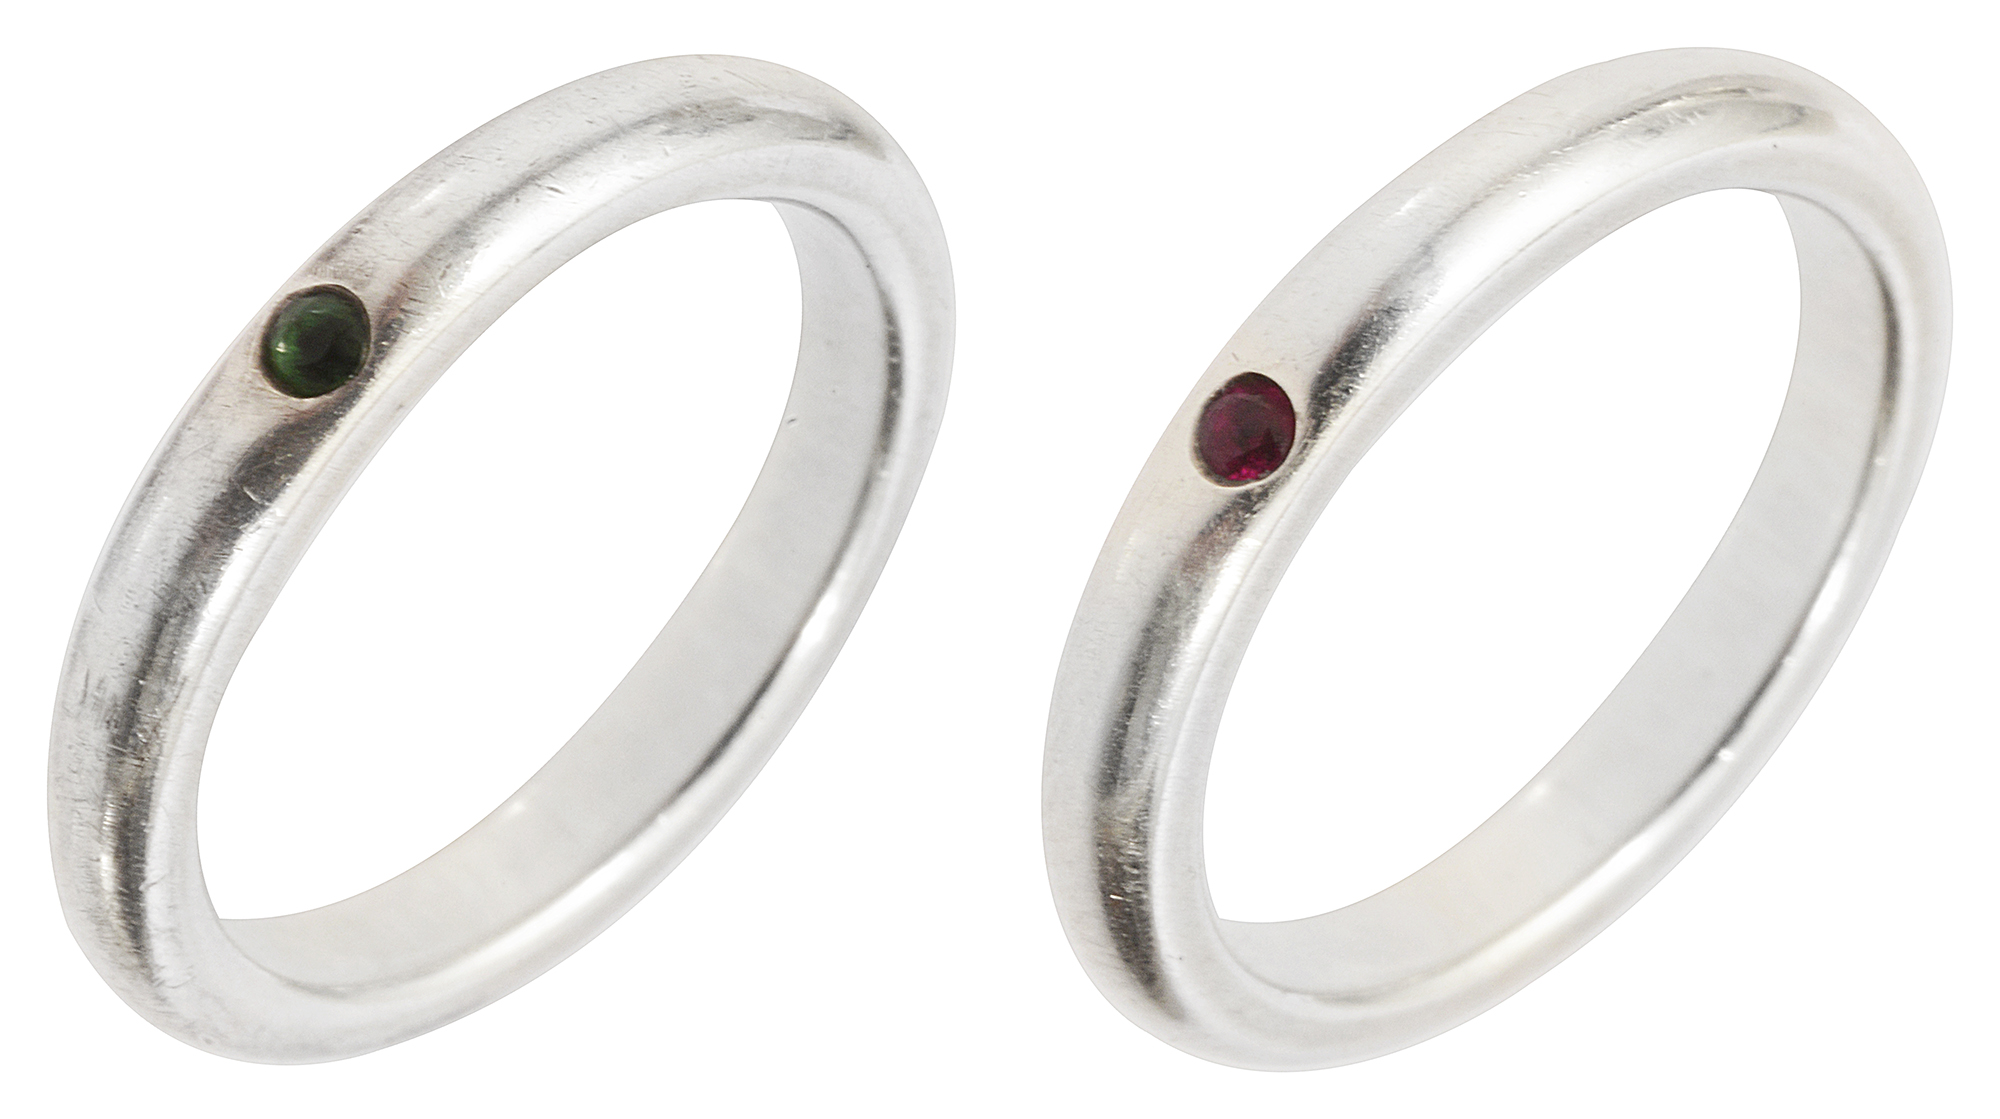 Two Tiffany & Co. Sterling silver band rings, designed by Elsa Peretti